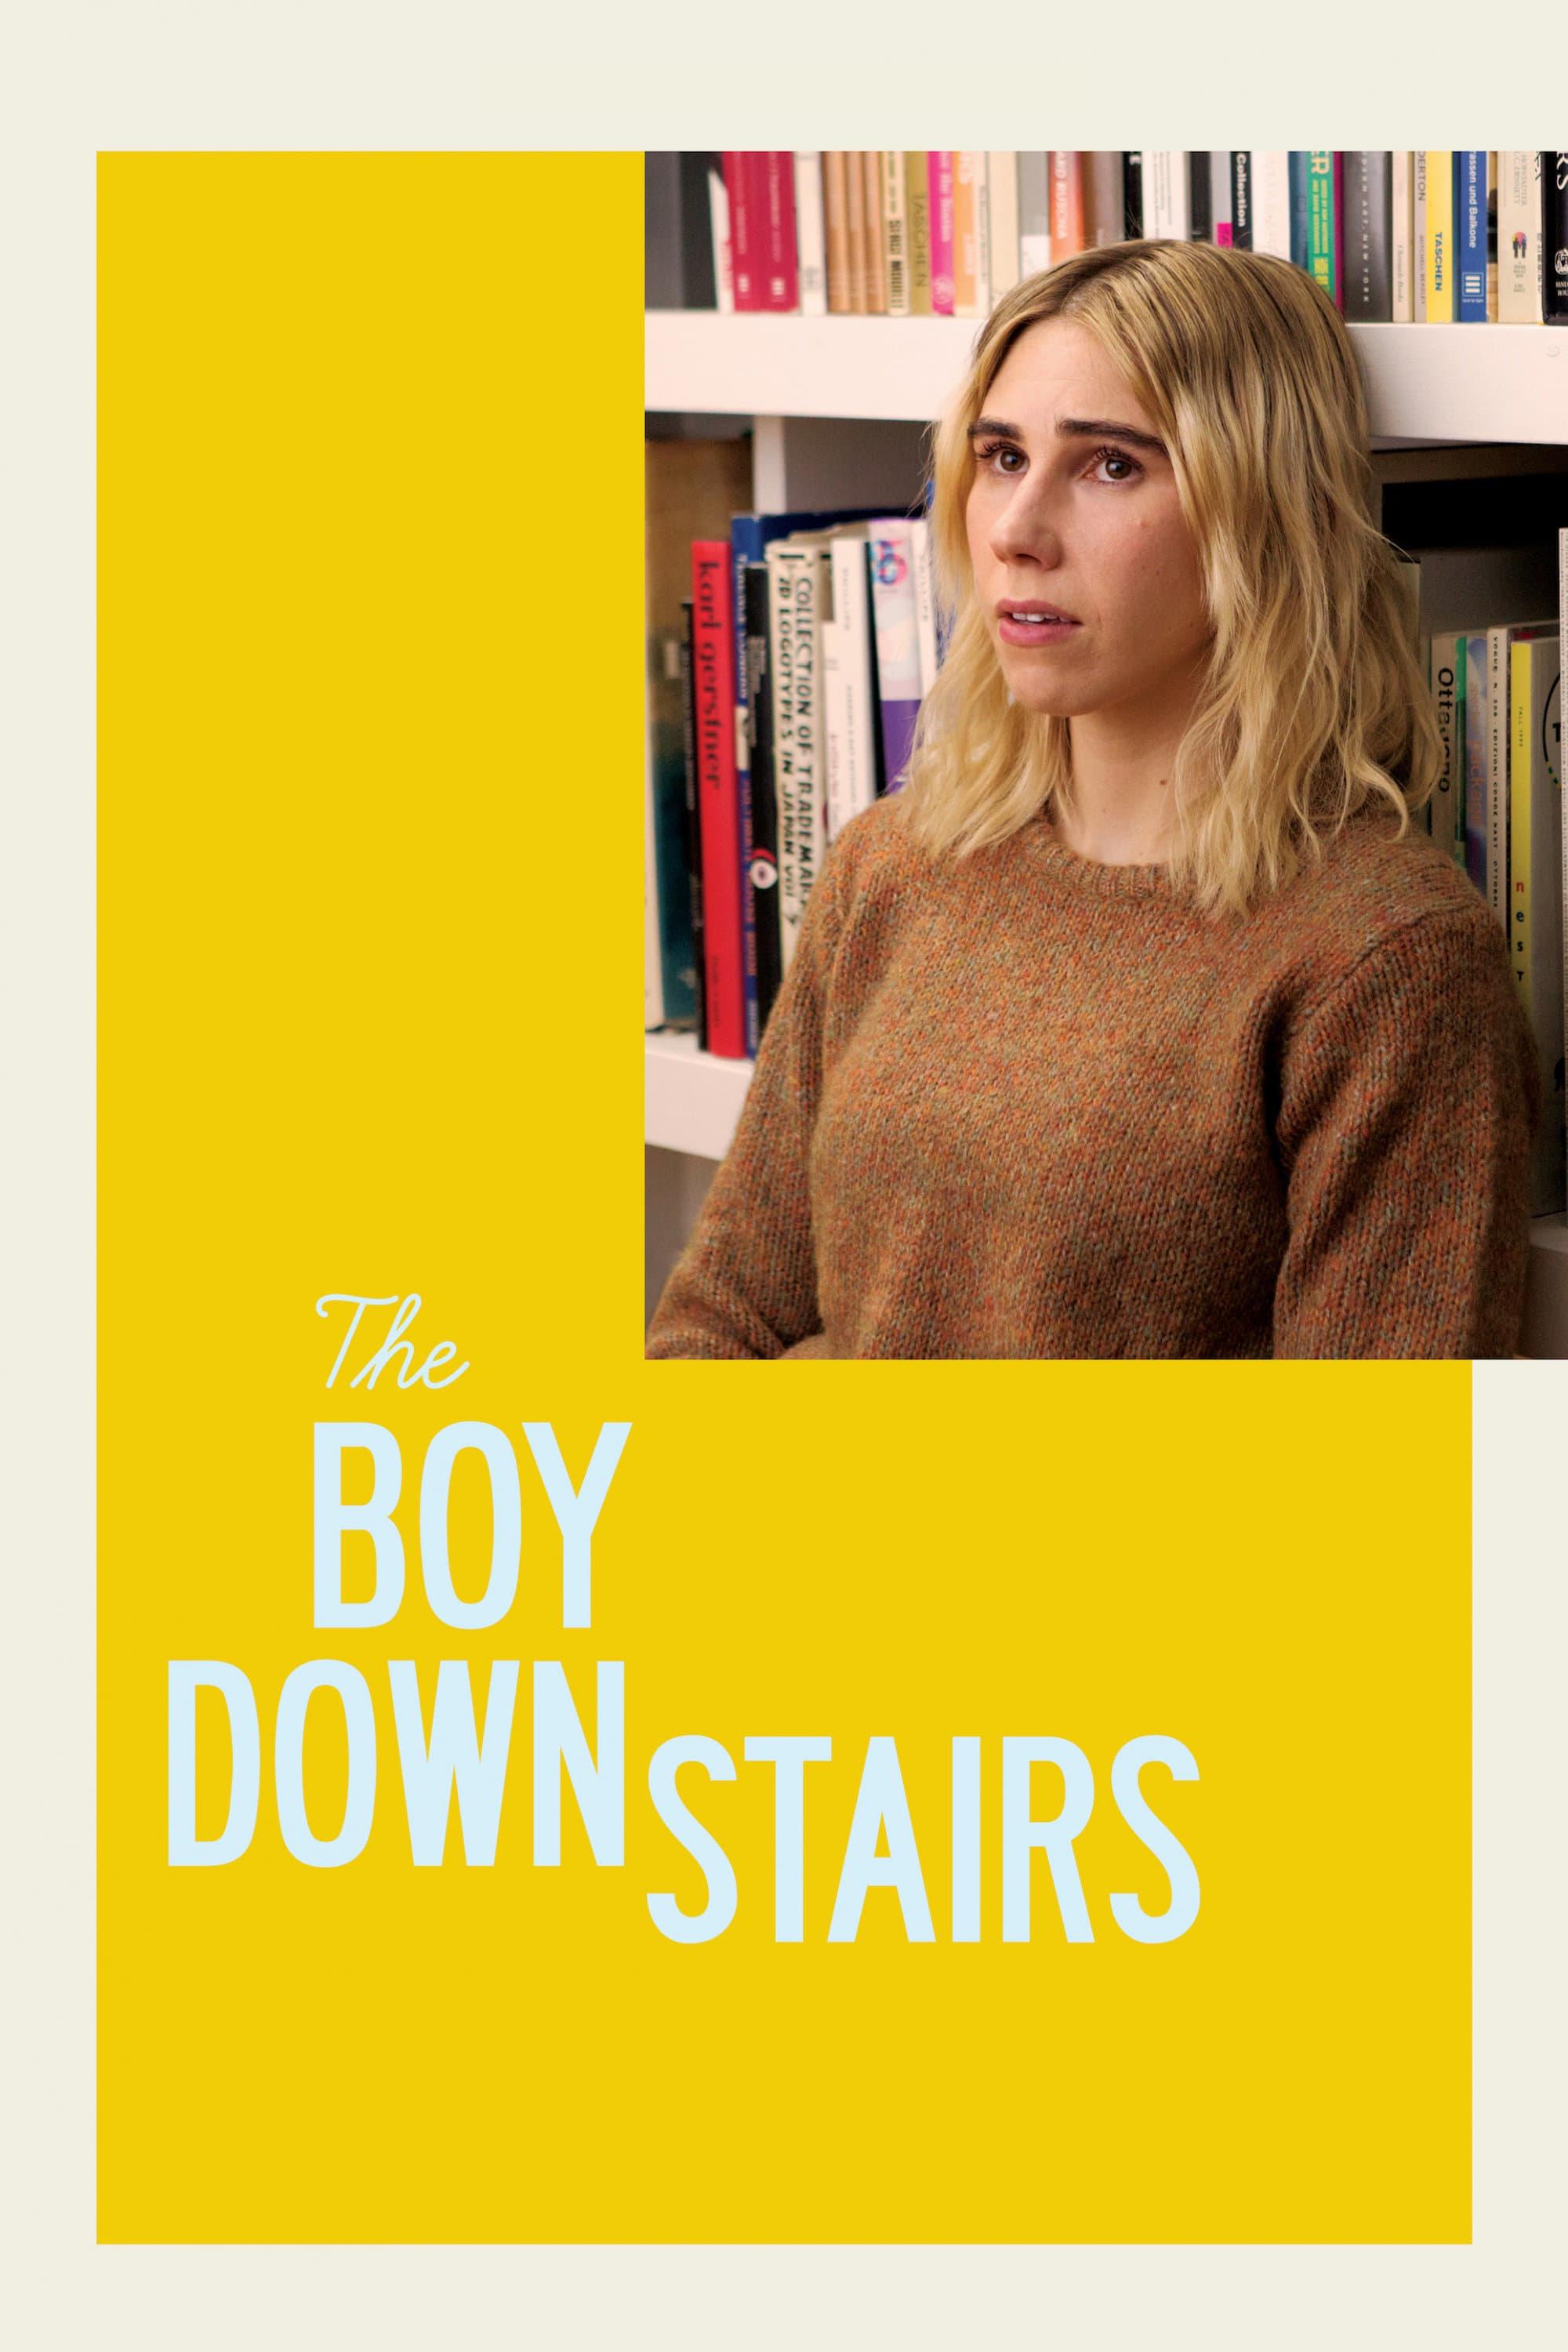 The Boy Downstairs poster